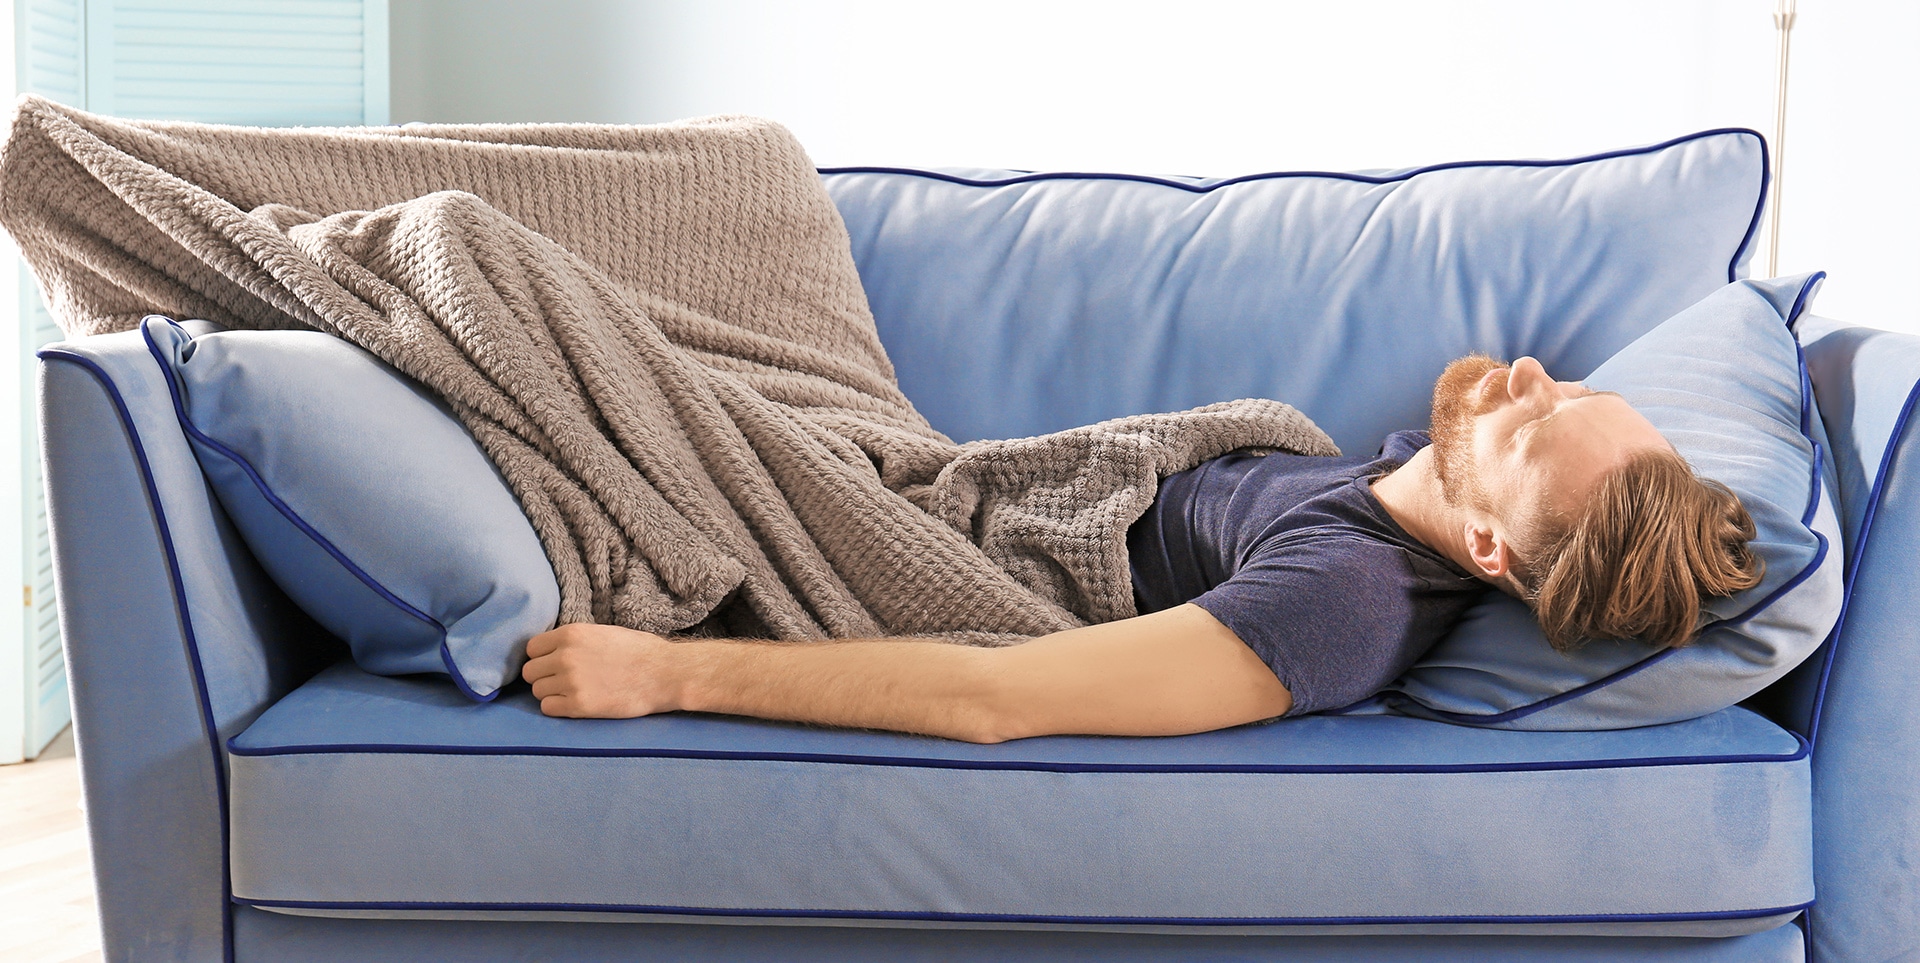 Sleeping on a Couch: Why It's Bad for Your Health